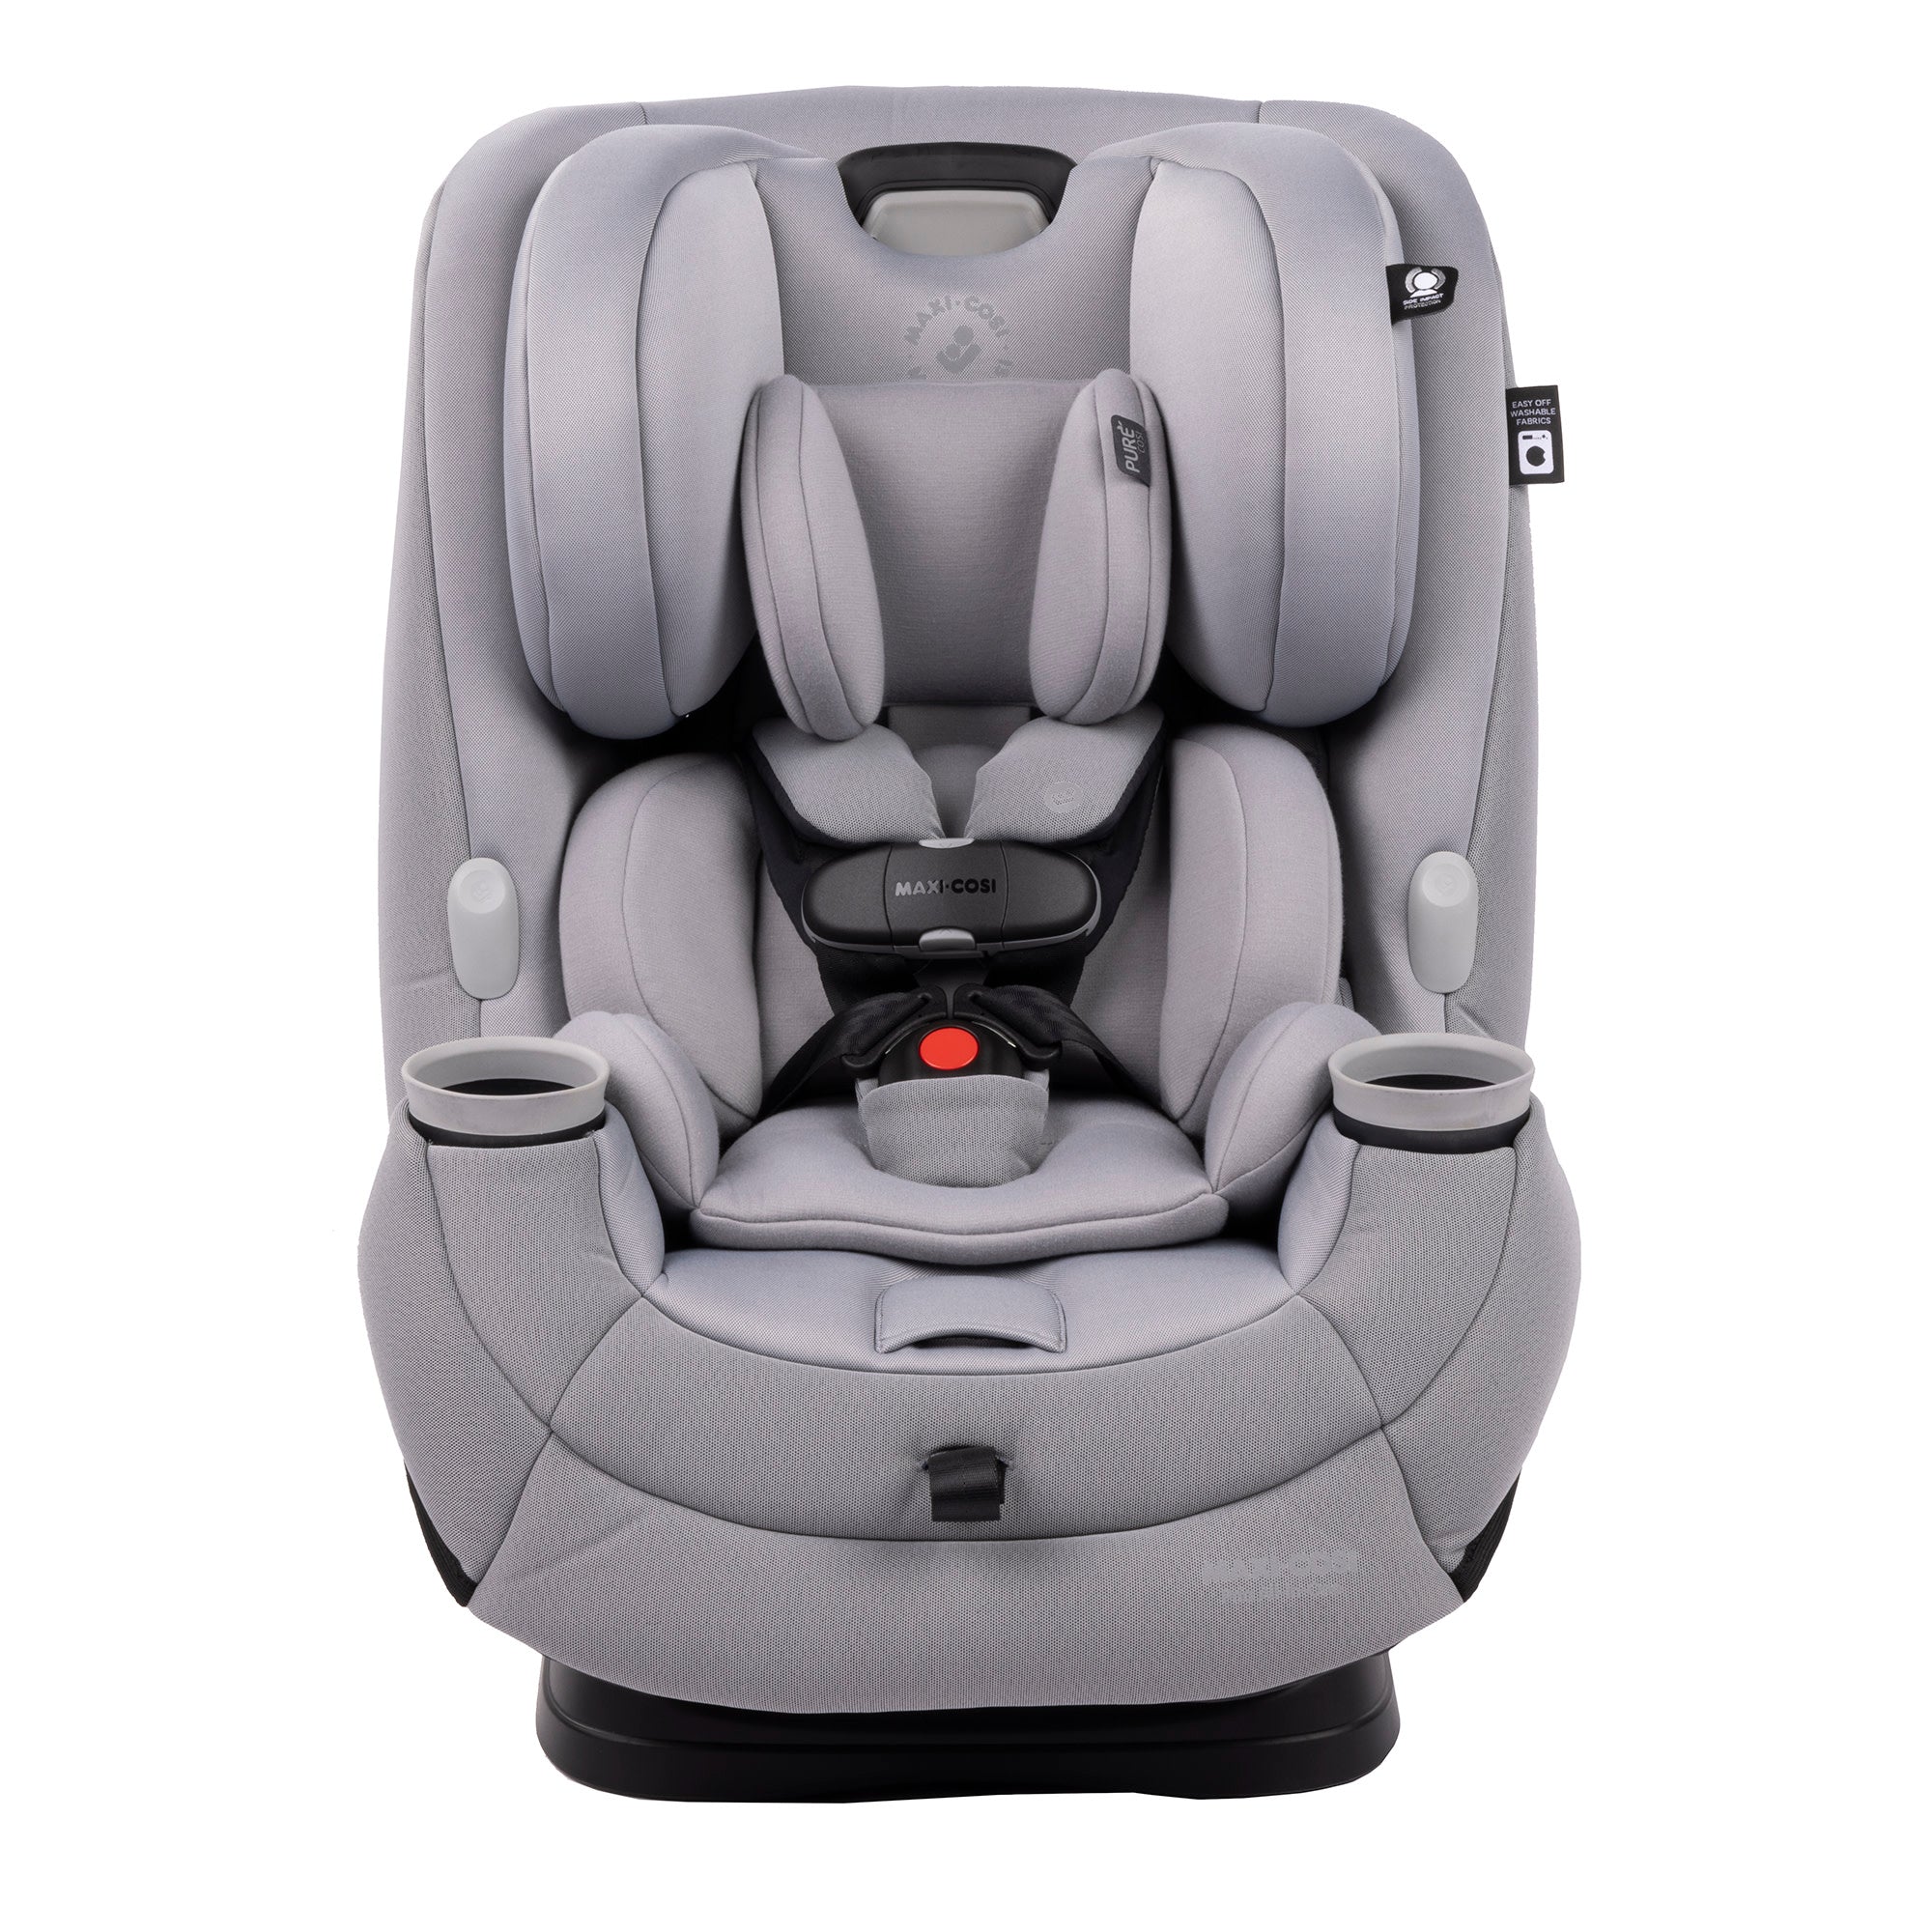 Pria All-in-One Convertible Car Seat - Authentic Gray